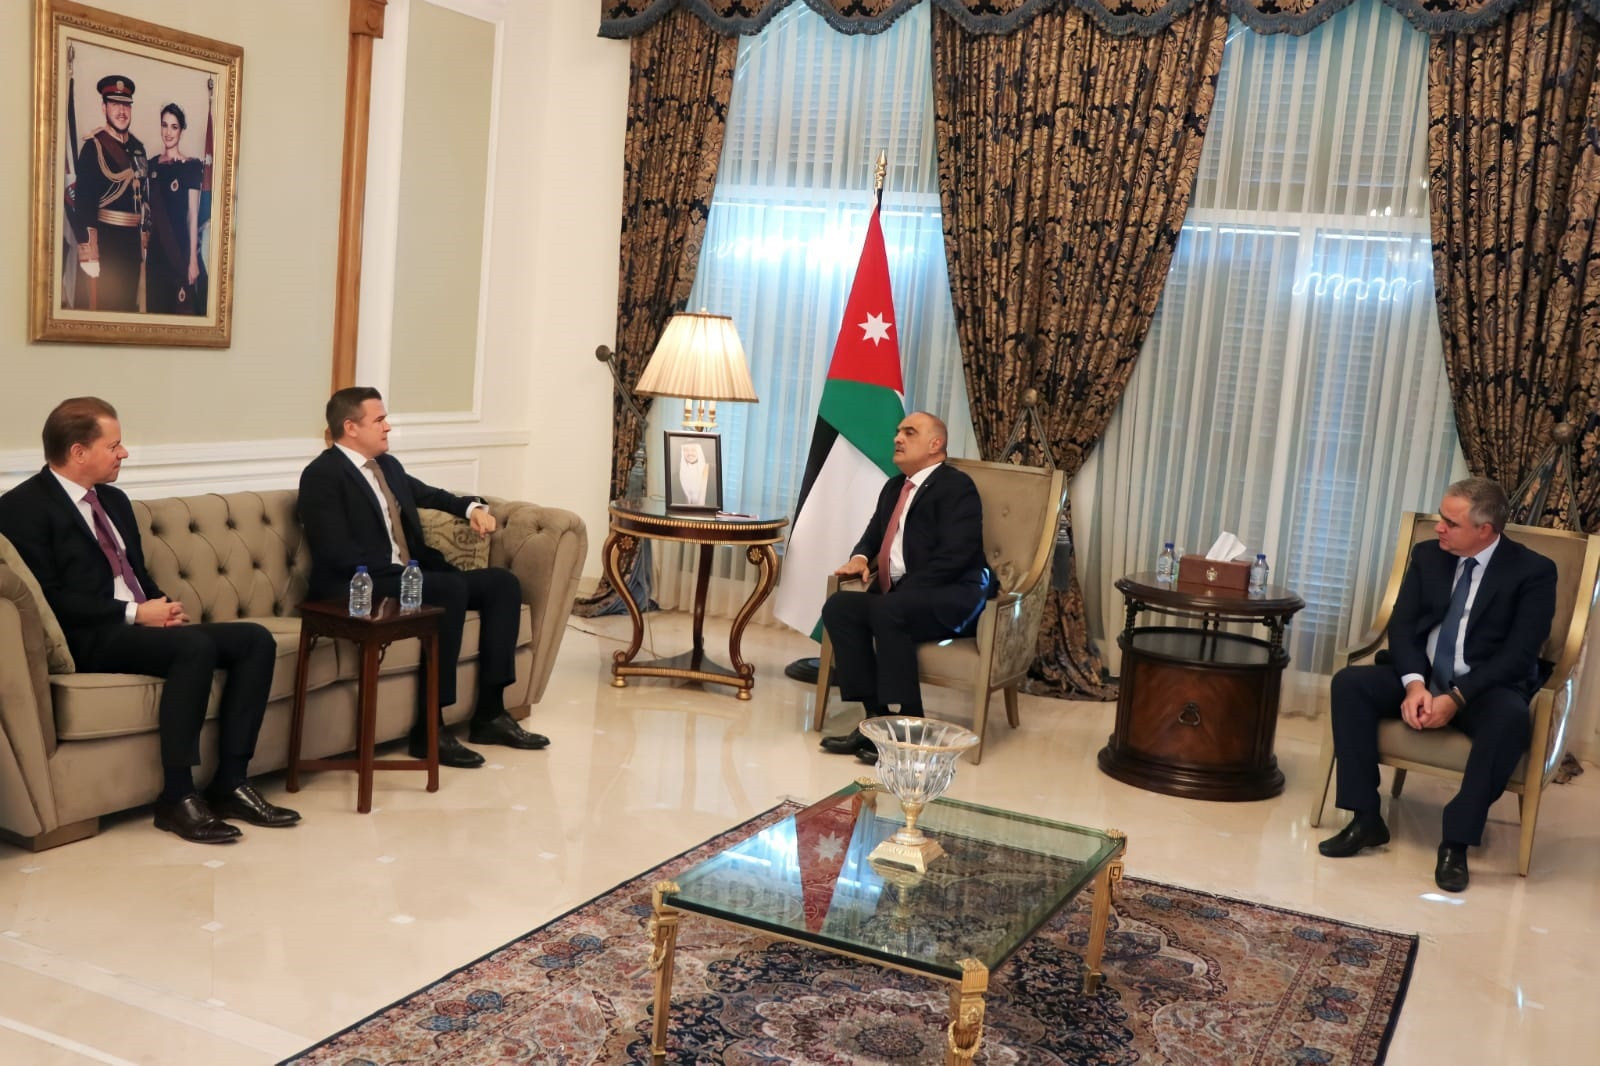 WADA leadership meet Prince Feisal and Jordanian Prime Minister on Middle East trip